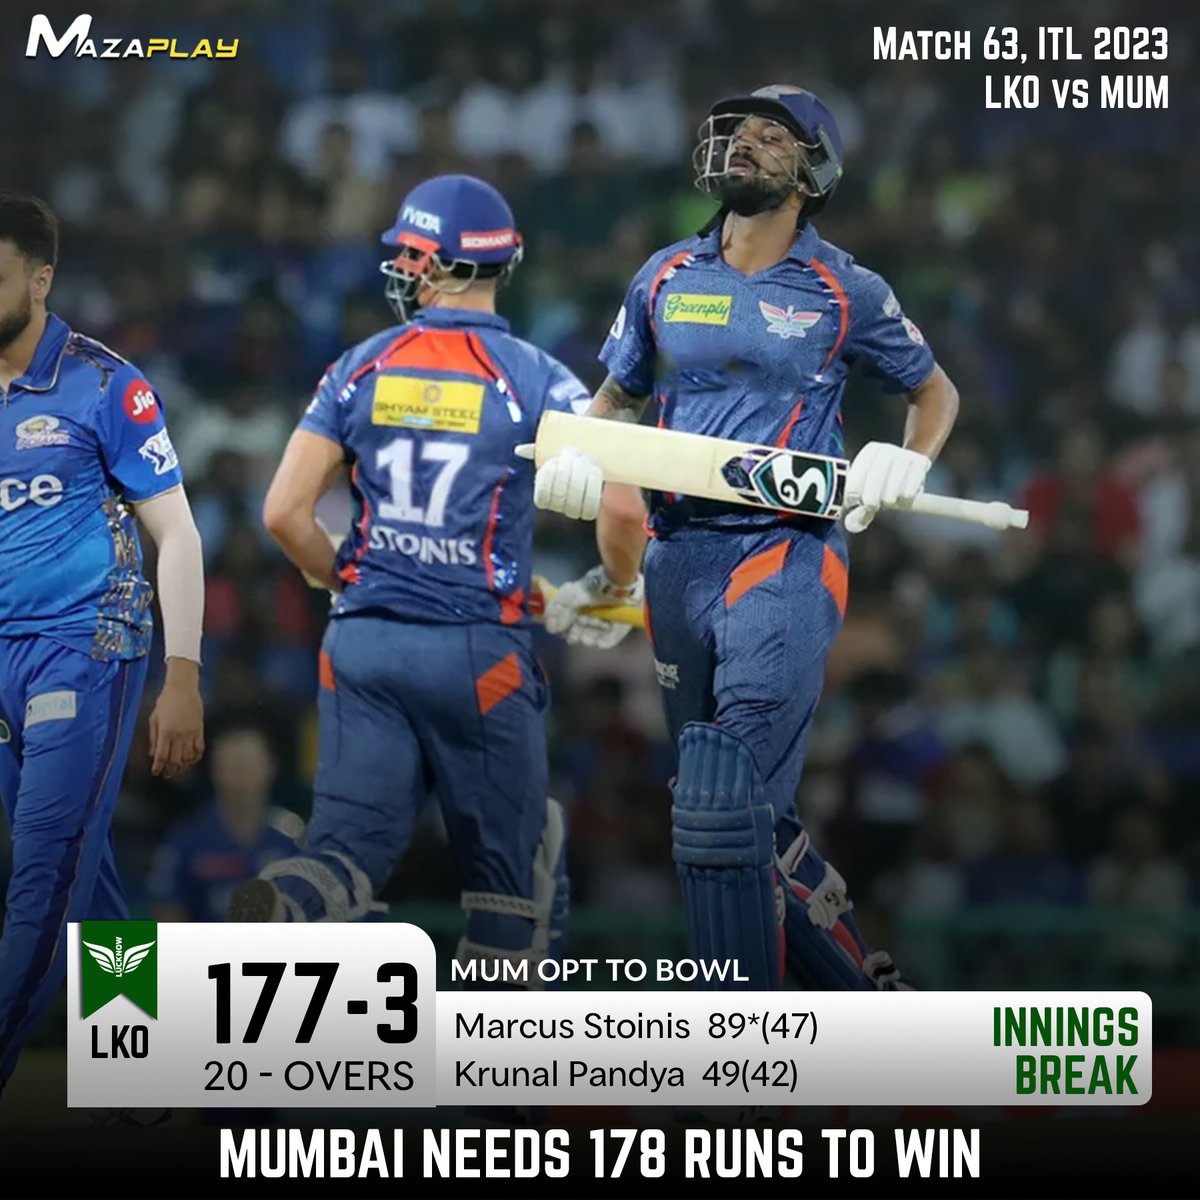 Marcus Stoinis' massive hitting and Krunal Pandya's captain's knock helped Lucknow post a formidable total of 177 runs on the board.

#MarcusStoinis #KrunalPandya #Mumbai #Lucknow #KrunalPandya #RohitSharma #IndianT20League #T20 #Cricket #MazaPlay